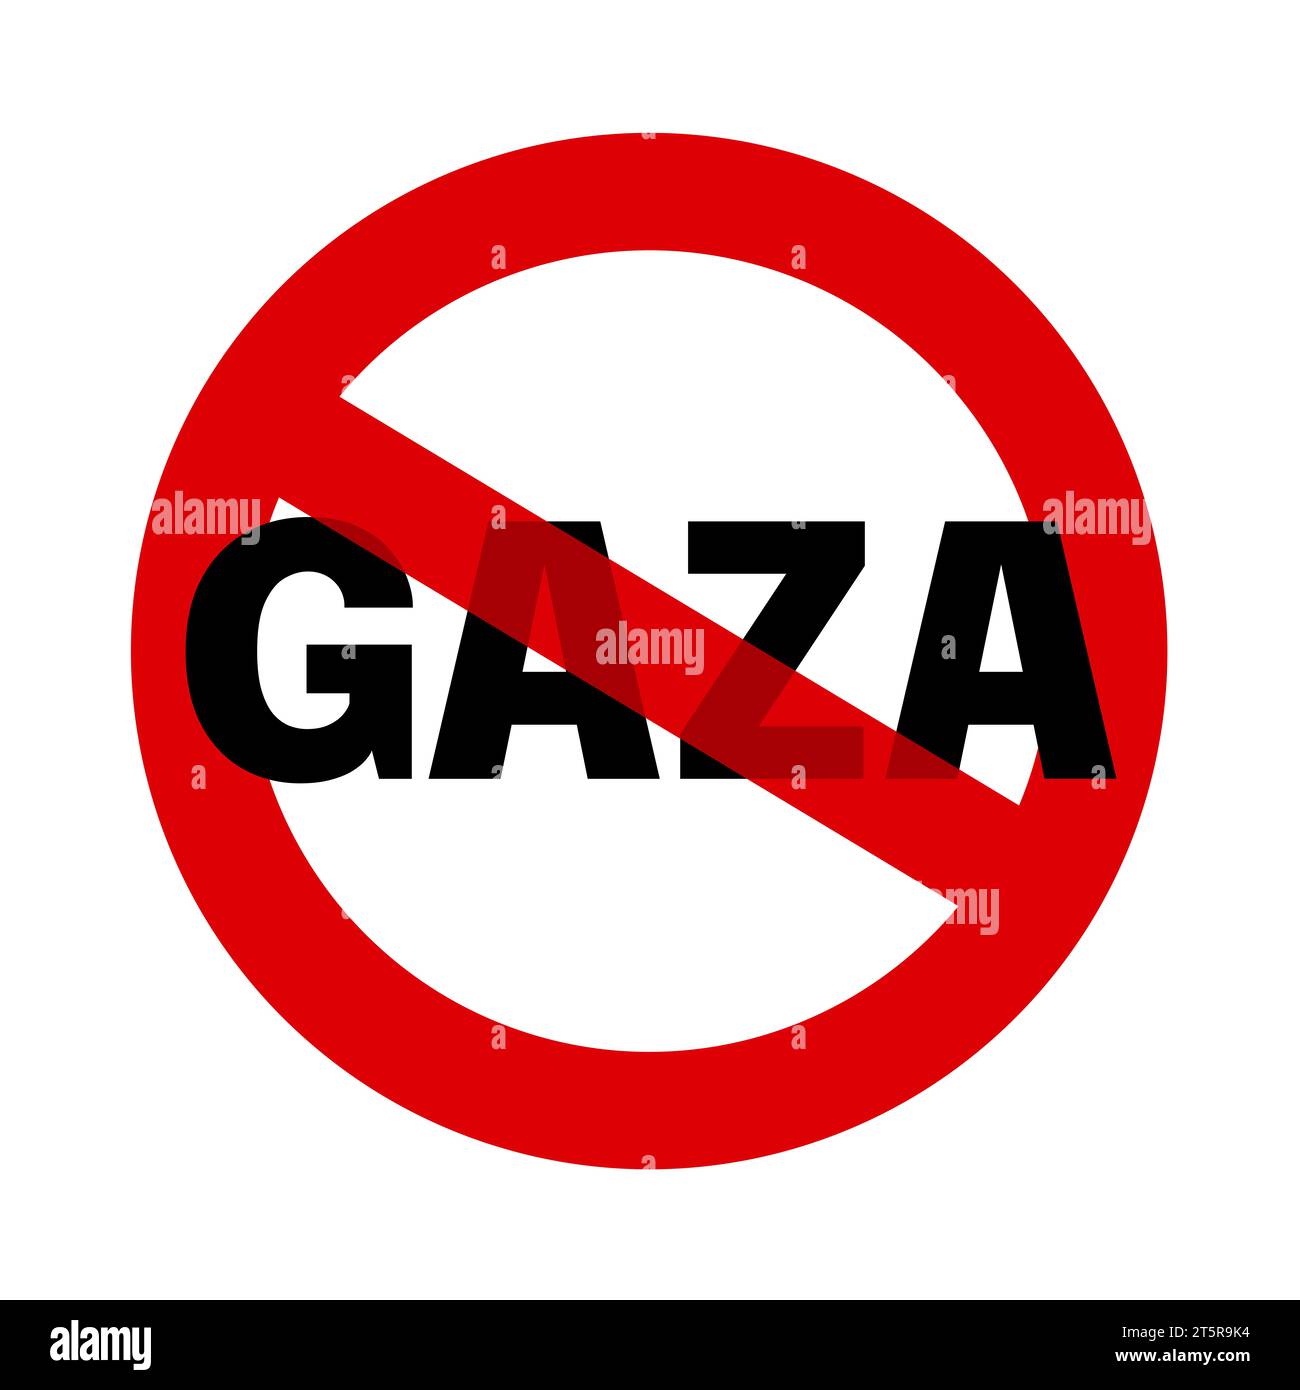 Gaza being crossed out - destruction, ruin and devastation of palestinian territory. Vector illustration isolated on white. Stock Photo